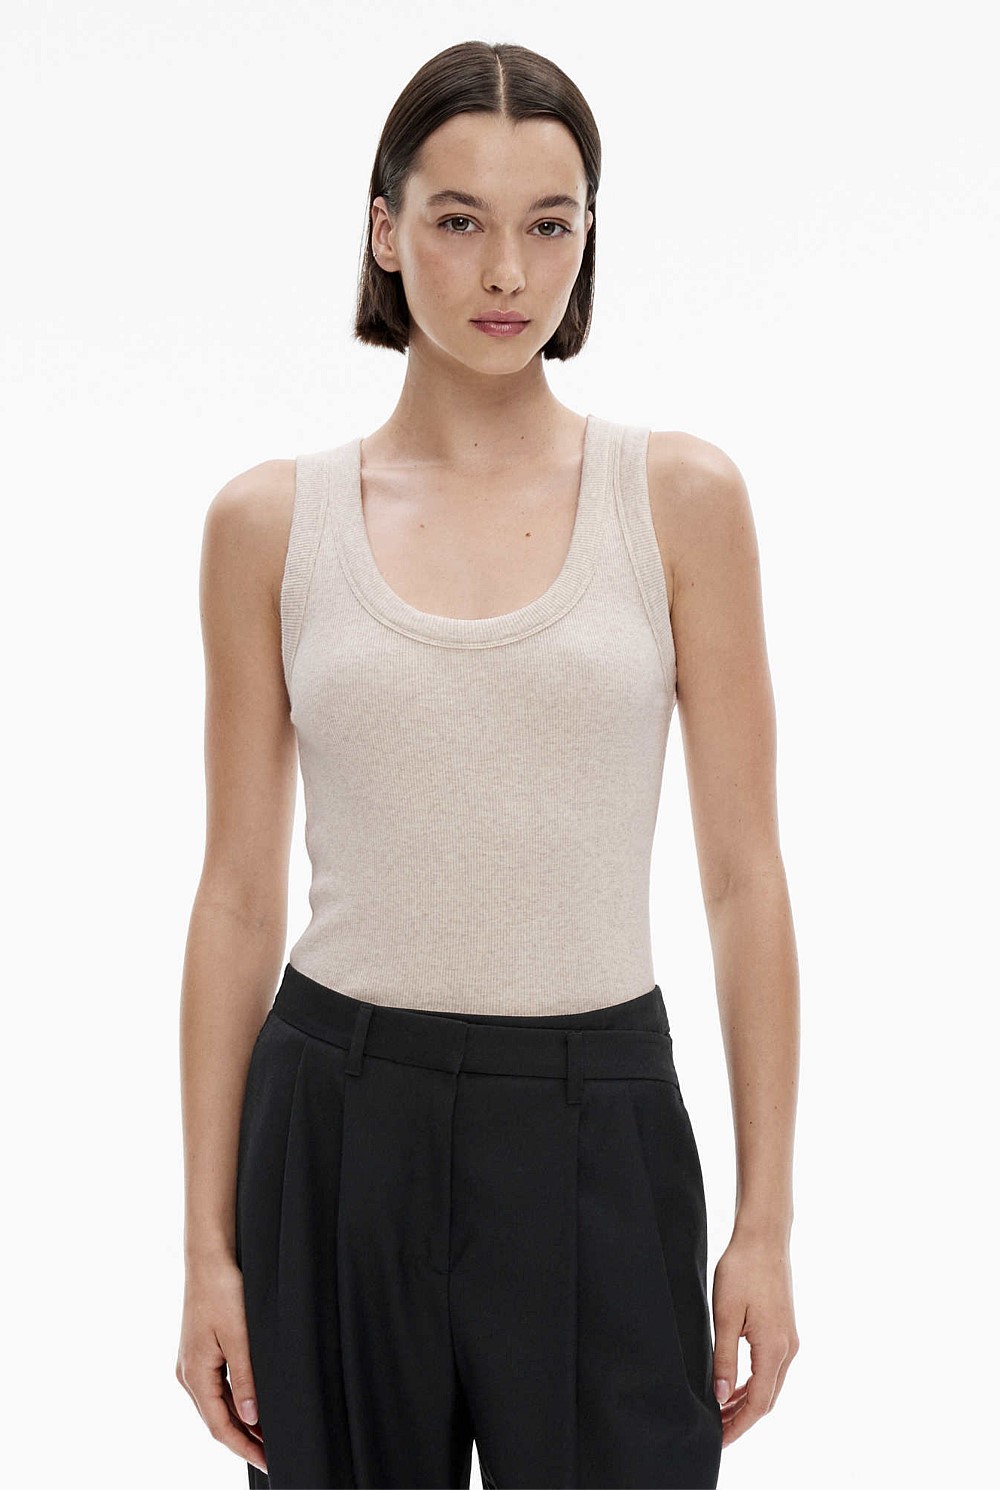 Shop Ribbed & Racer Tank Tops Online - Witchery